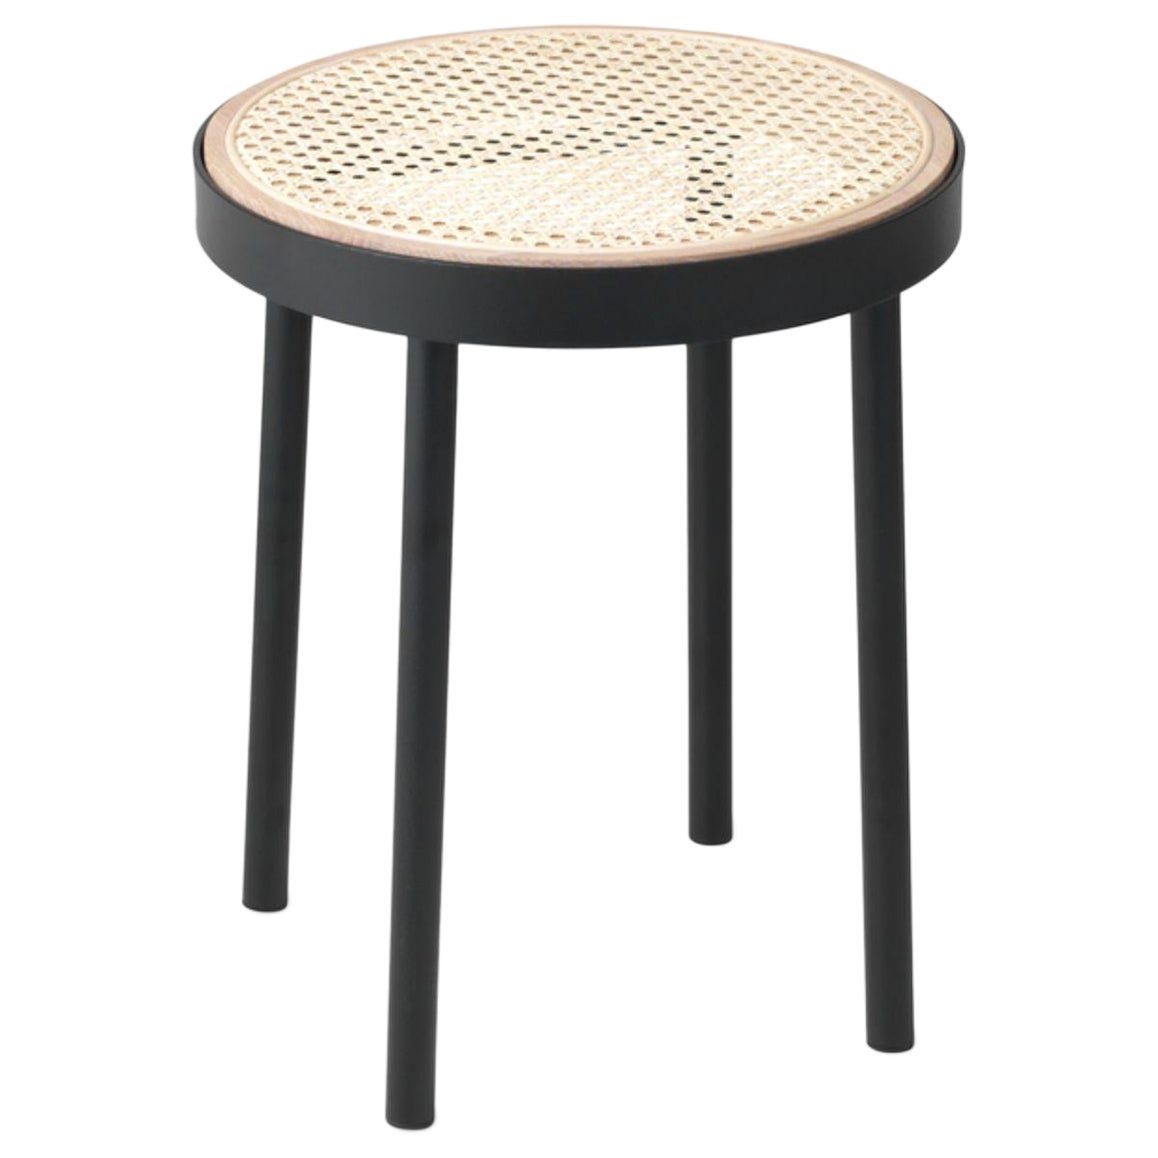 Be My Guest Stool by Warm Nordic